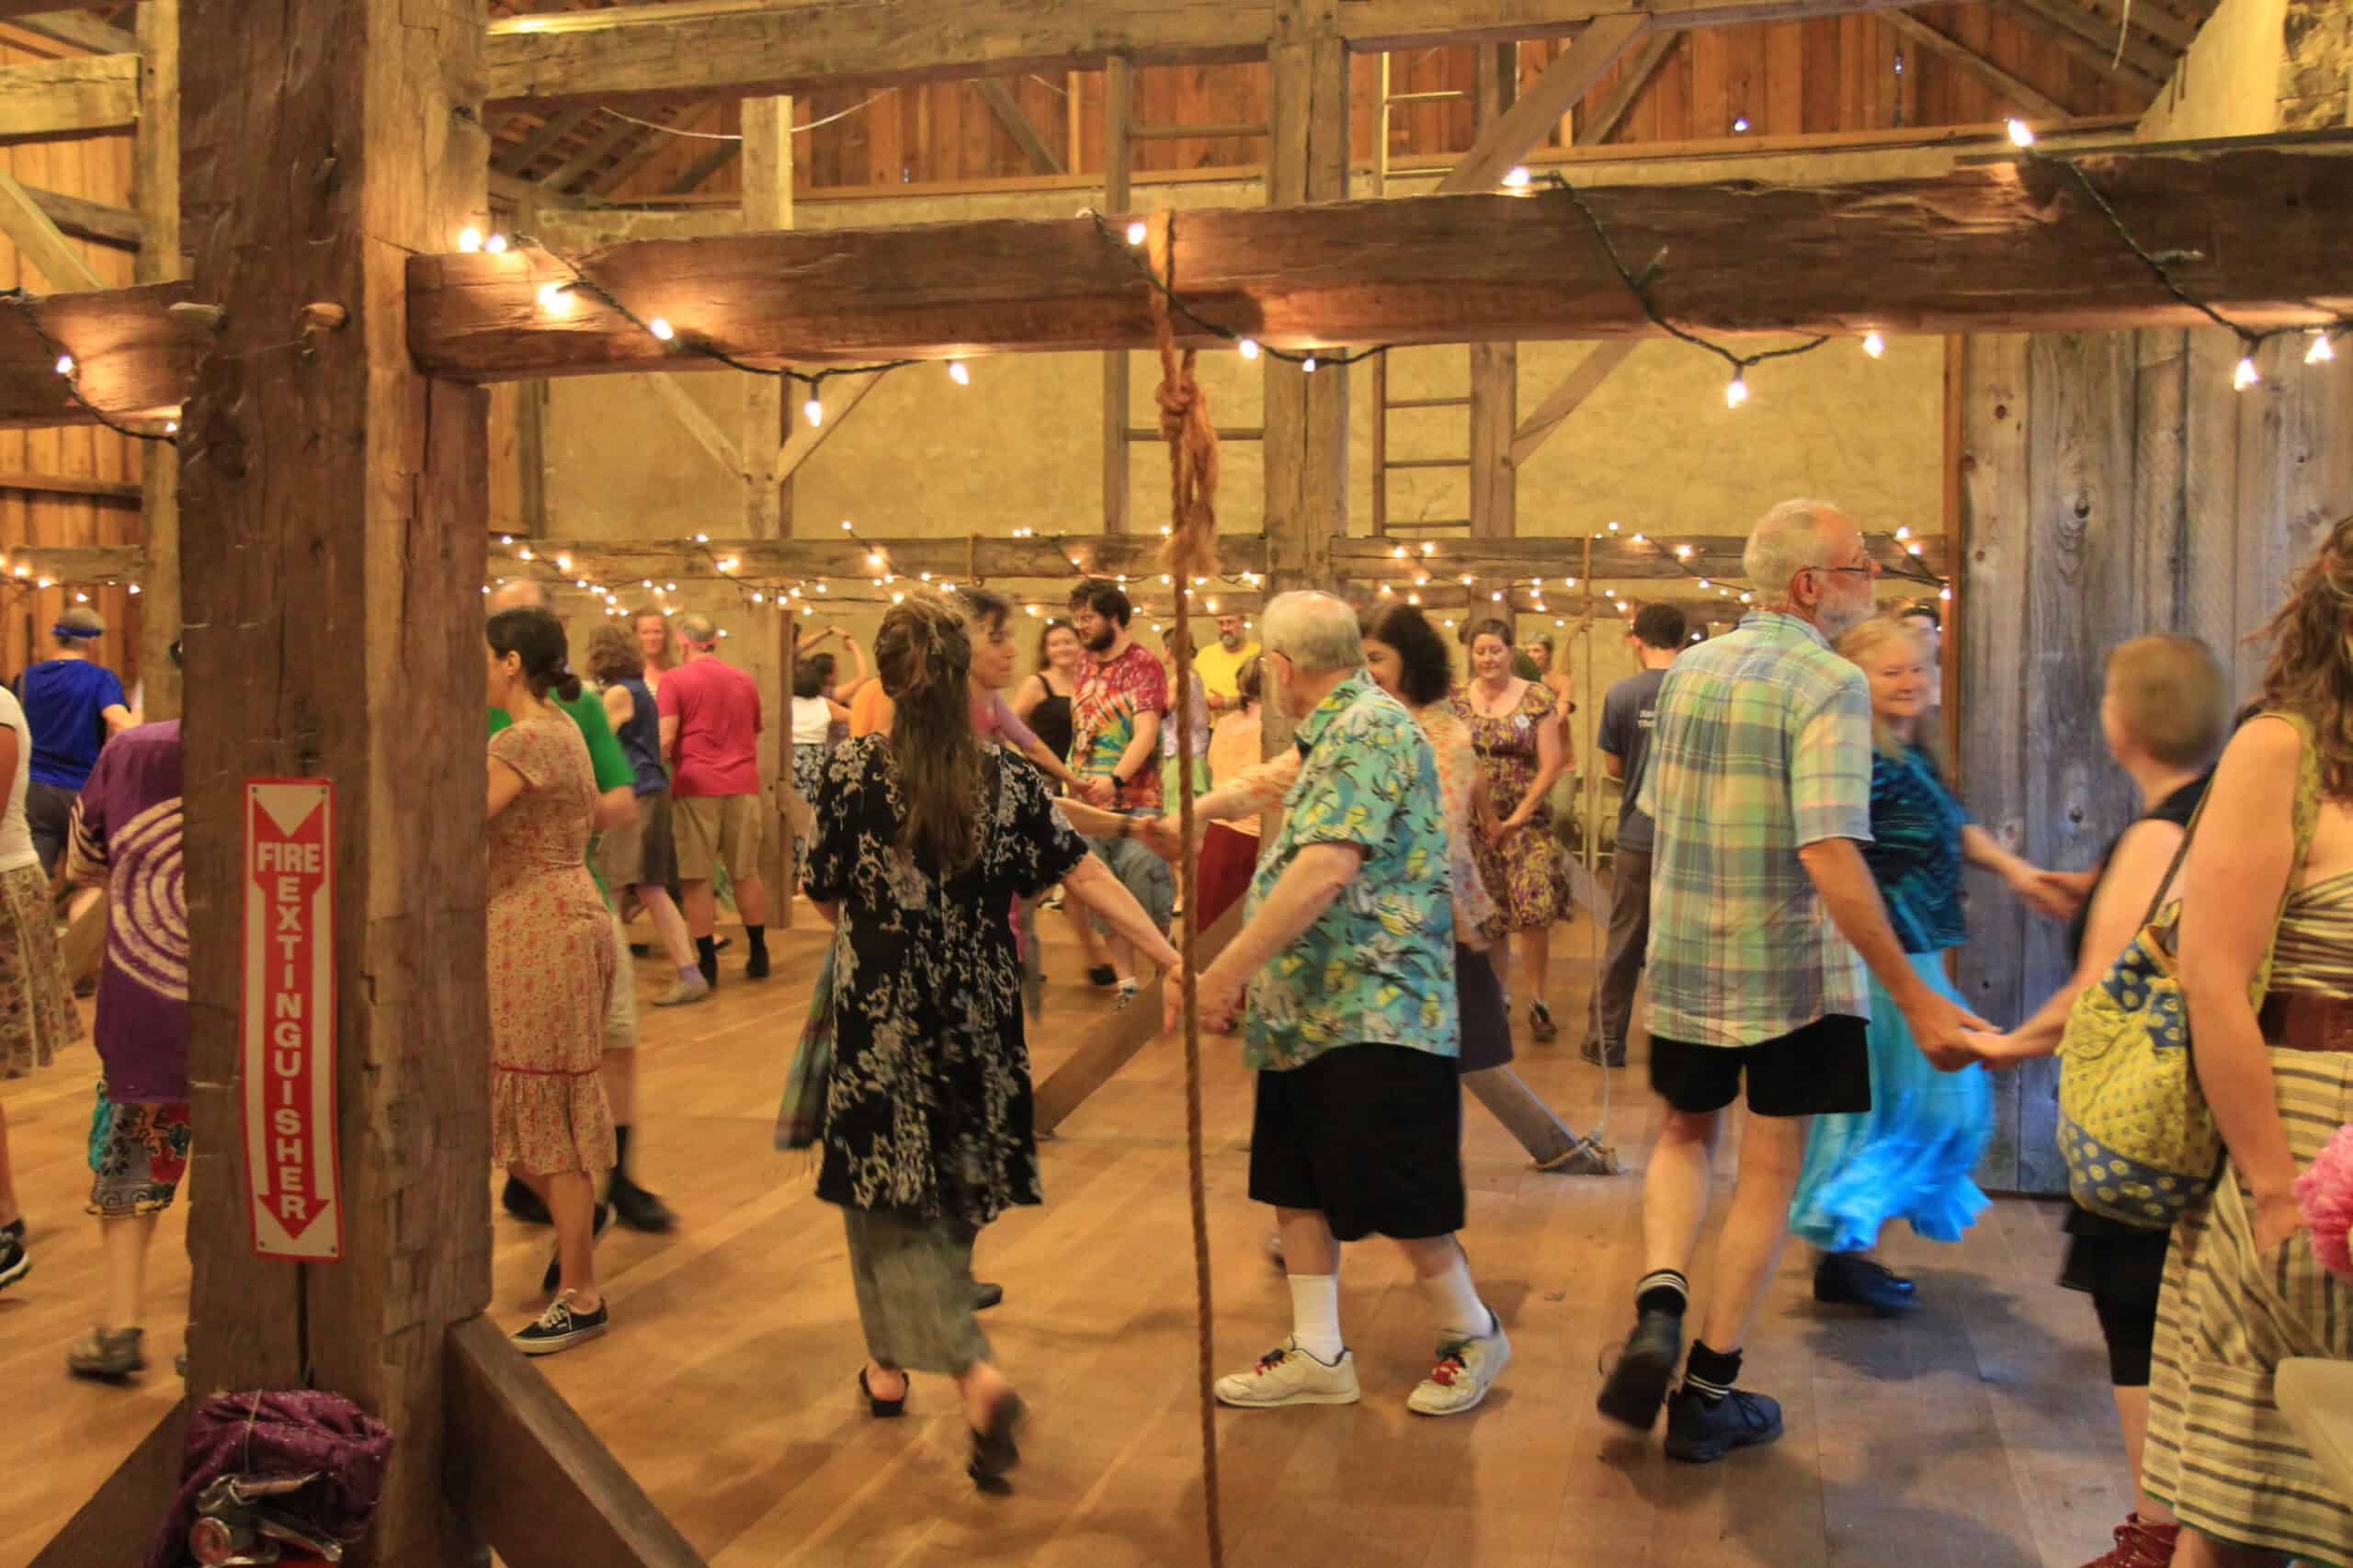 People contra dancing in a barn with twinkling lights above.